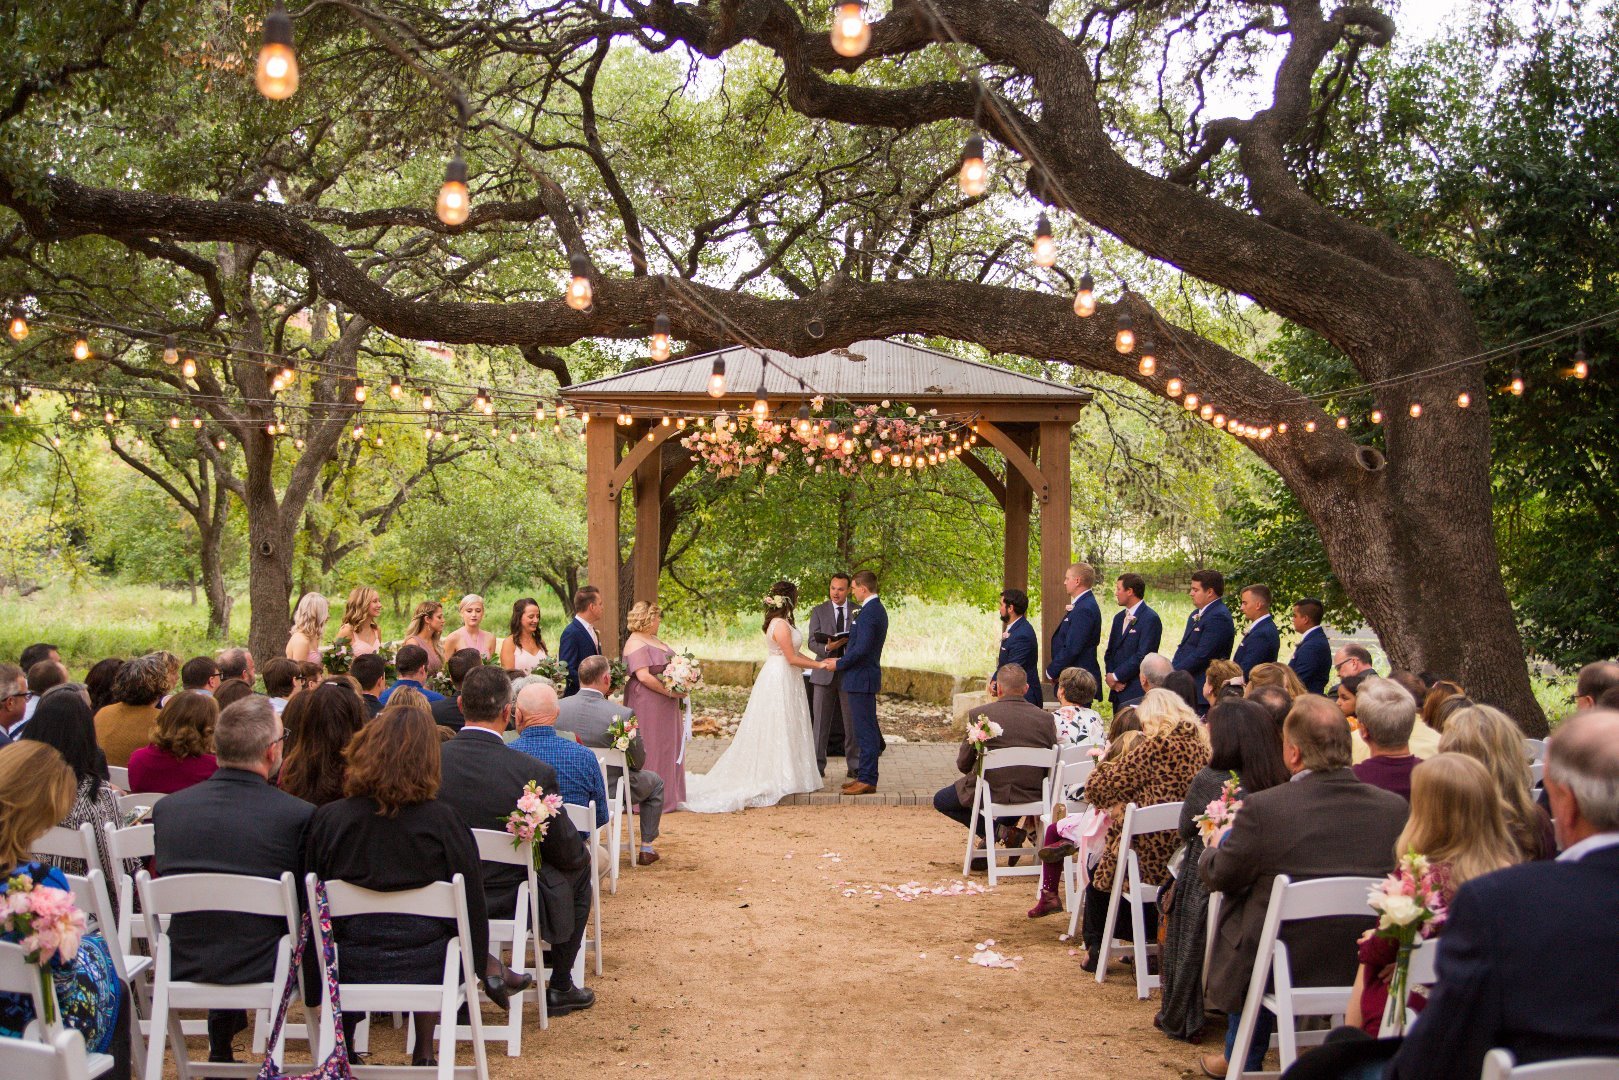 From His Garden Event Planning and Floral Decor -San Antonio Weddings